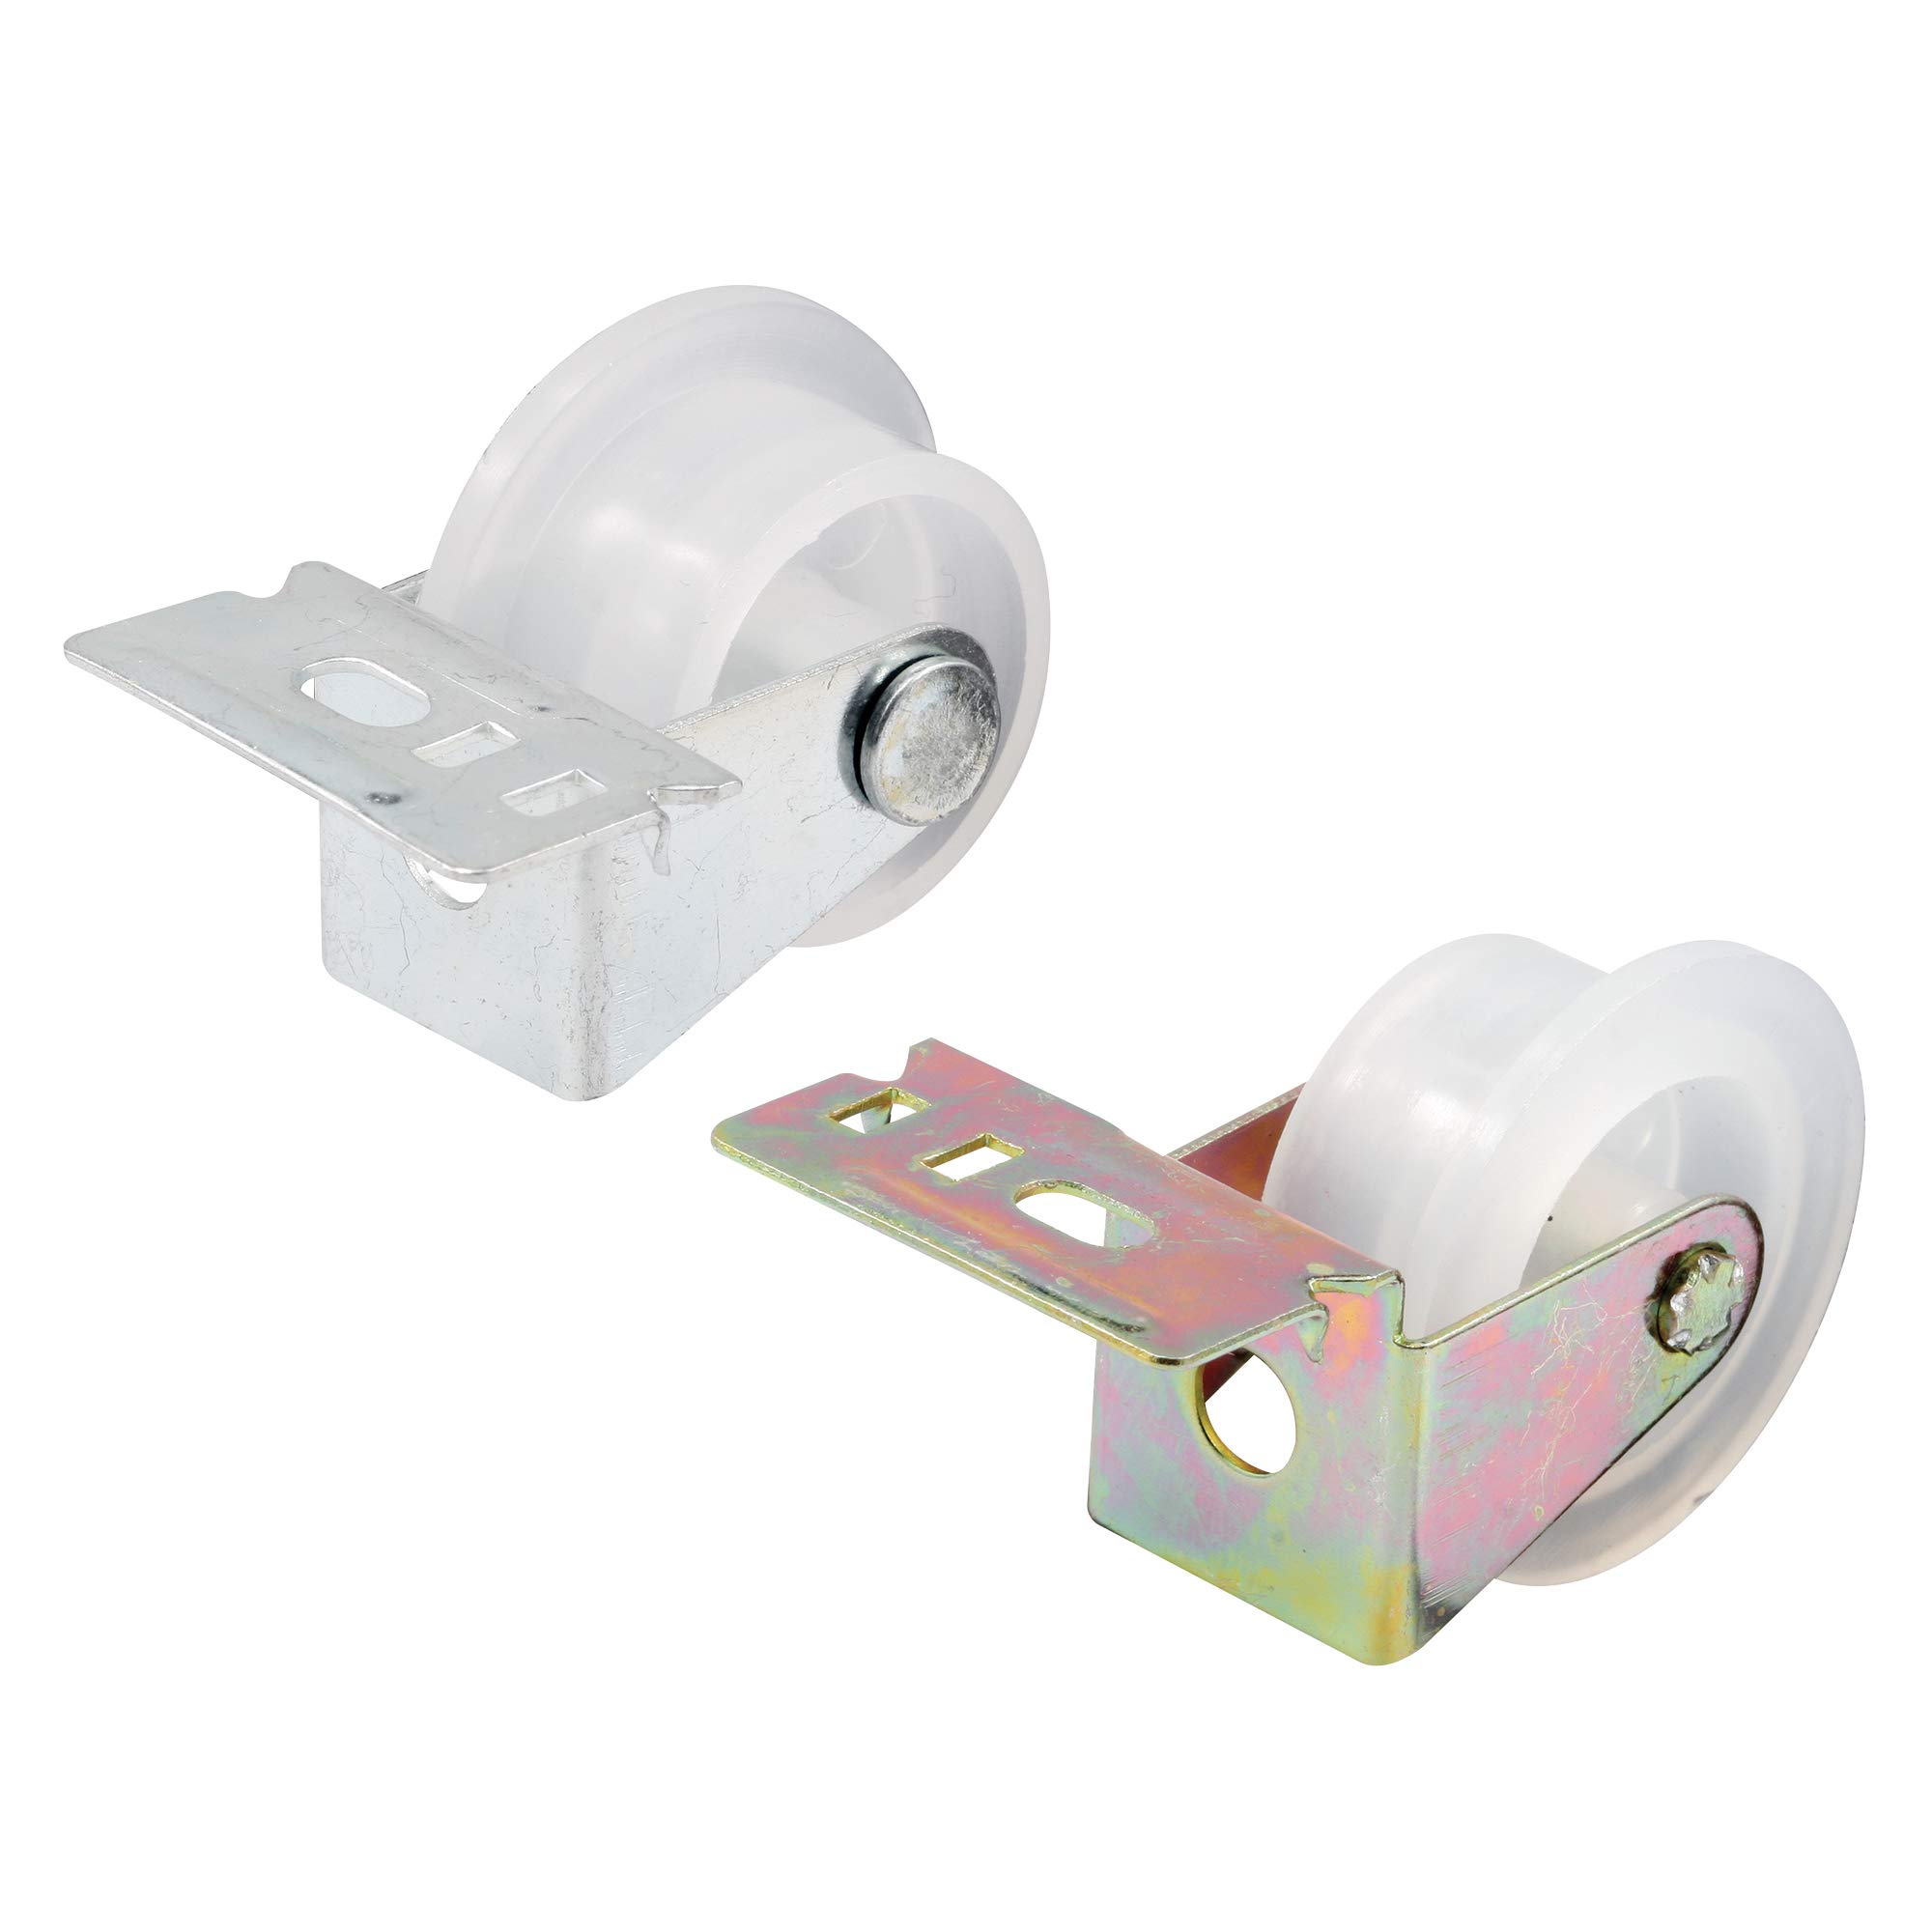 1-Pair Prime-Line 1" Front Drawer Guide Rollers $2.56 + Free Shipping w/ Prime or on $25+